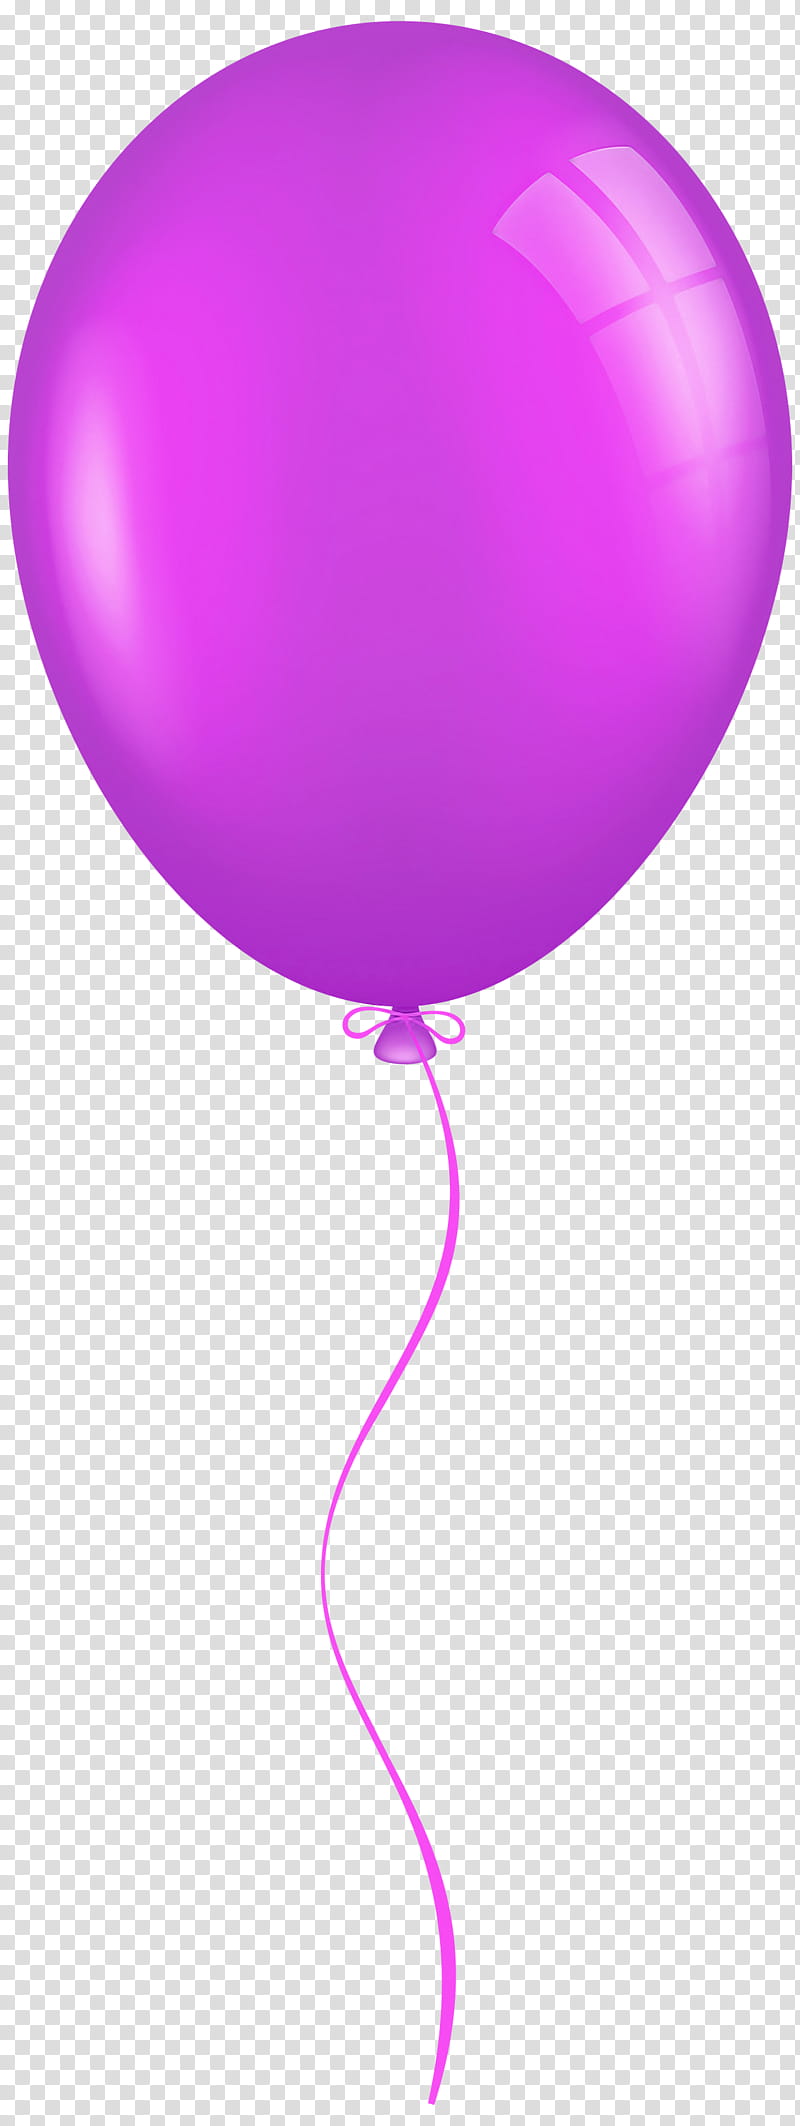 balloon pink violet purple magenta, Party Supply, Material Property transparent background PNG clipart